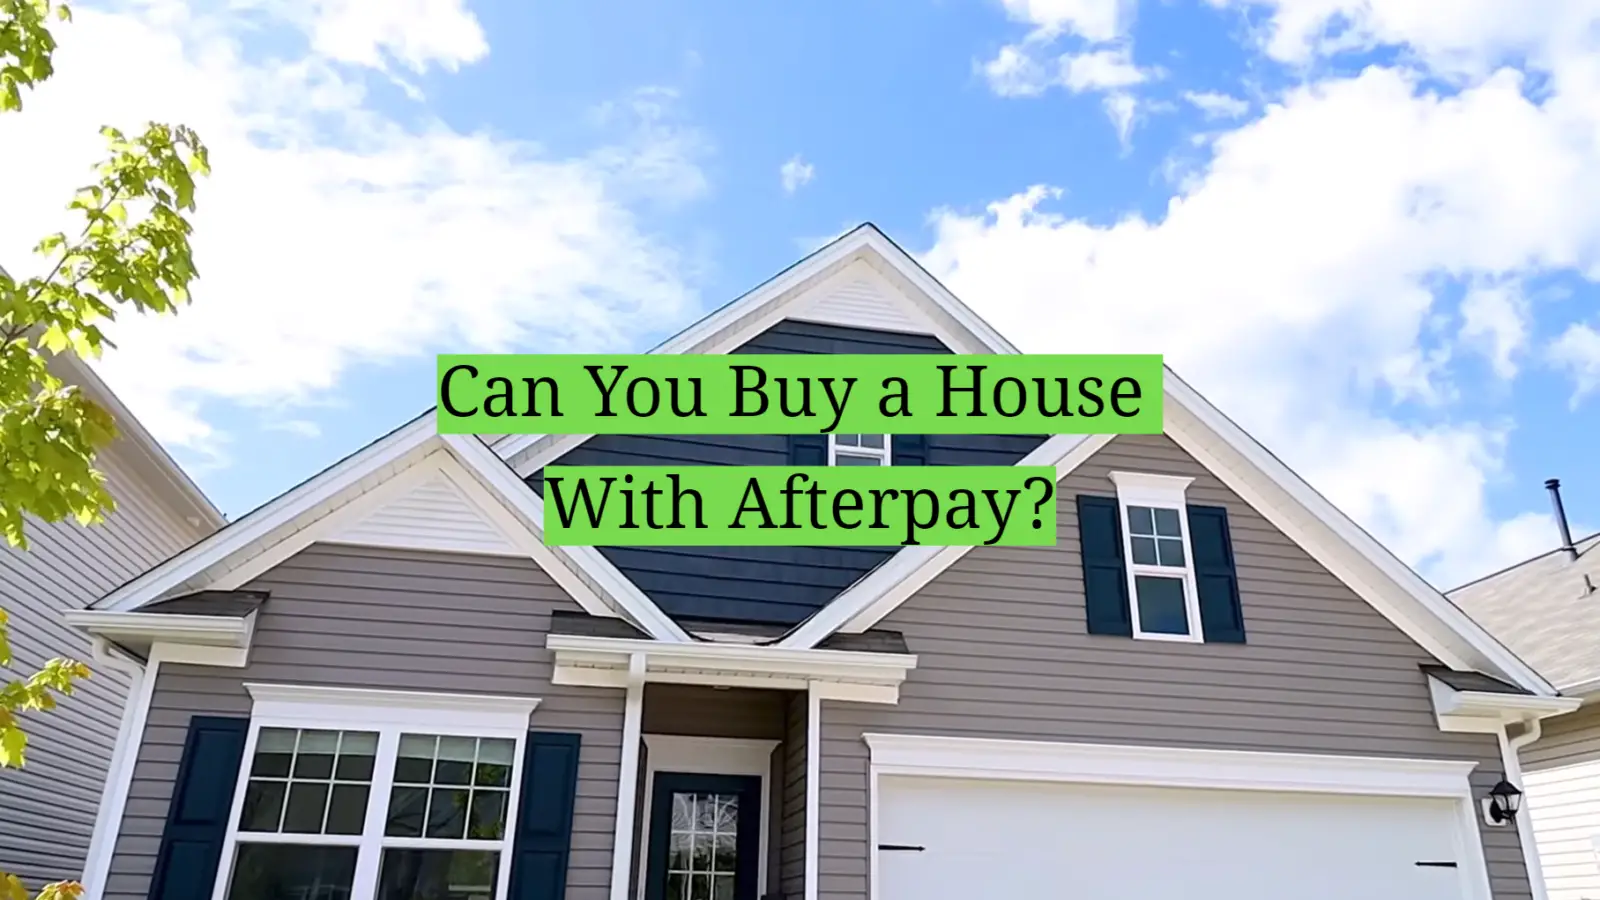 Can You Buy a House With Afterpay?